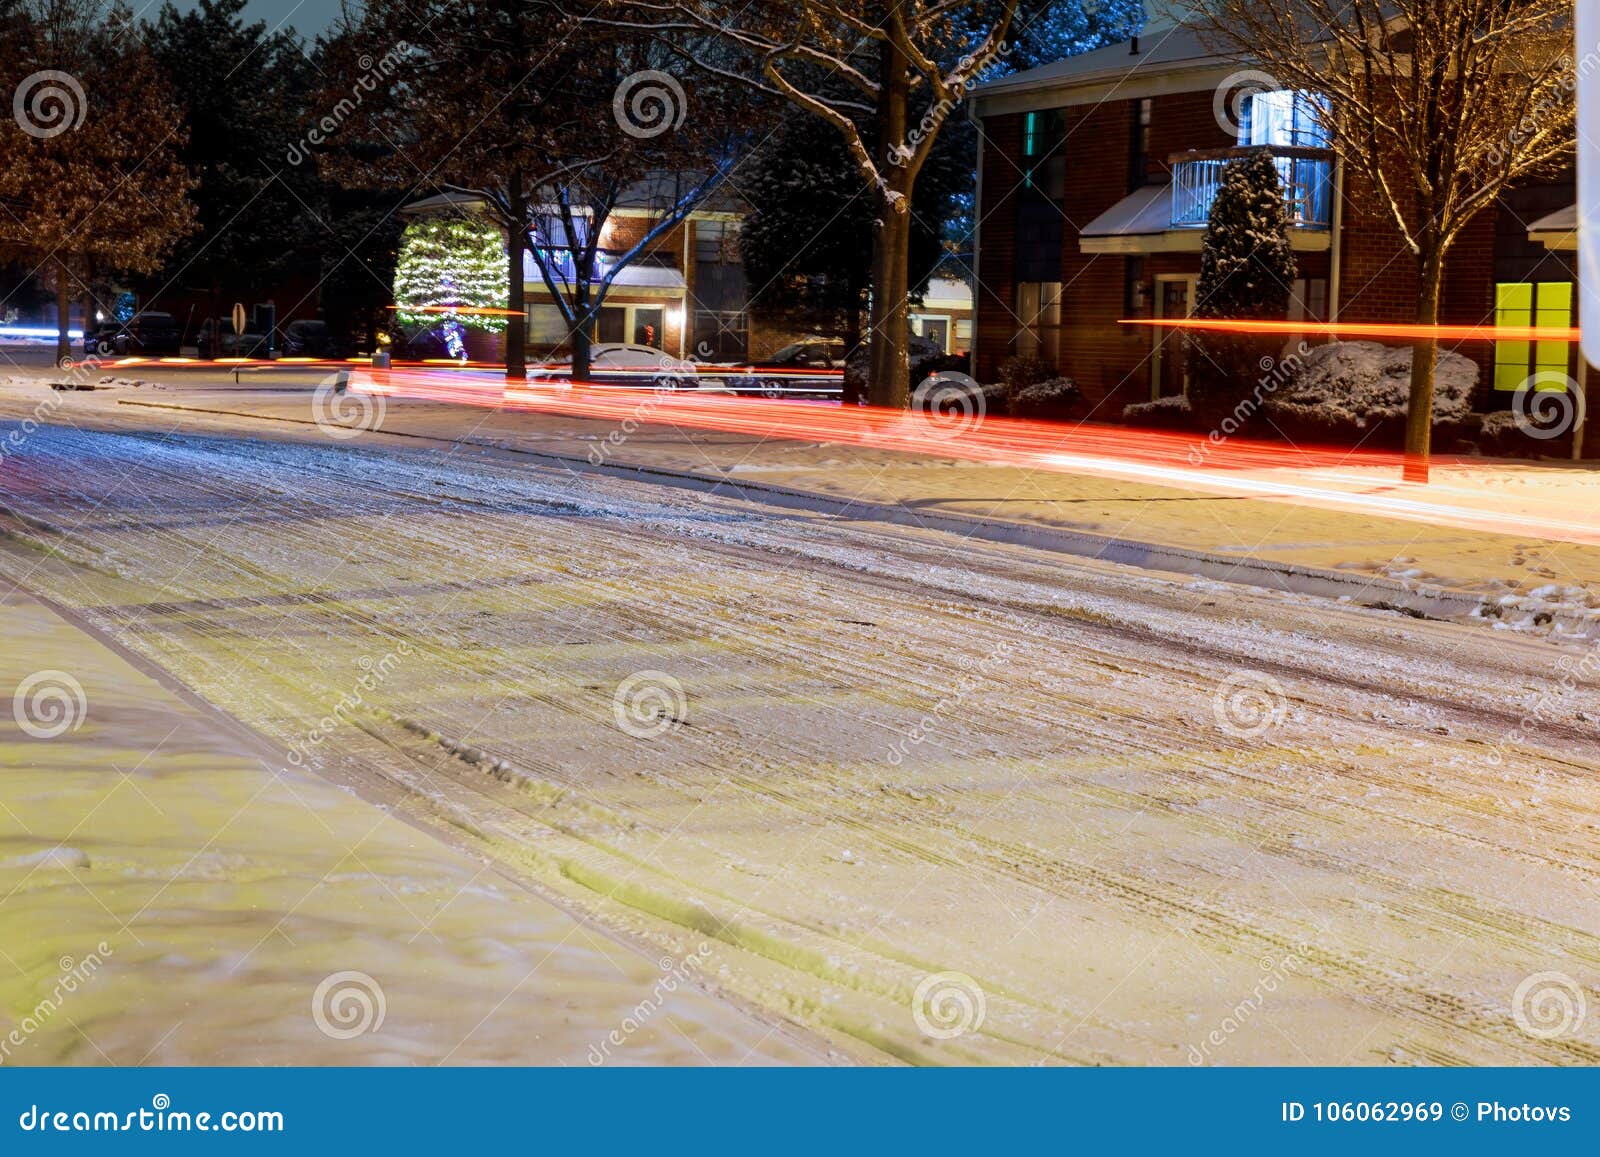 Winter Night Road Snow Background Stock Image - Image of exterior ...